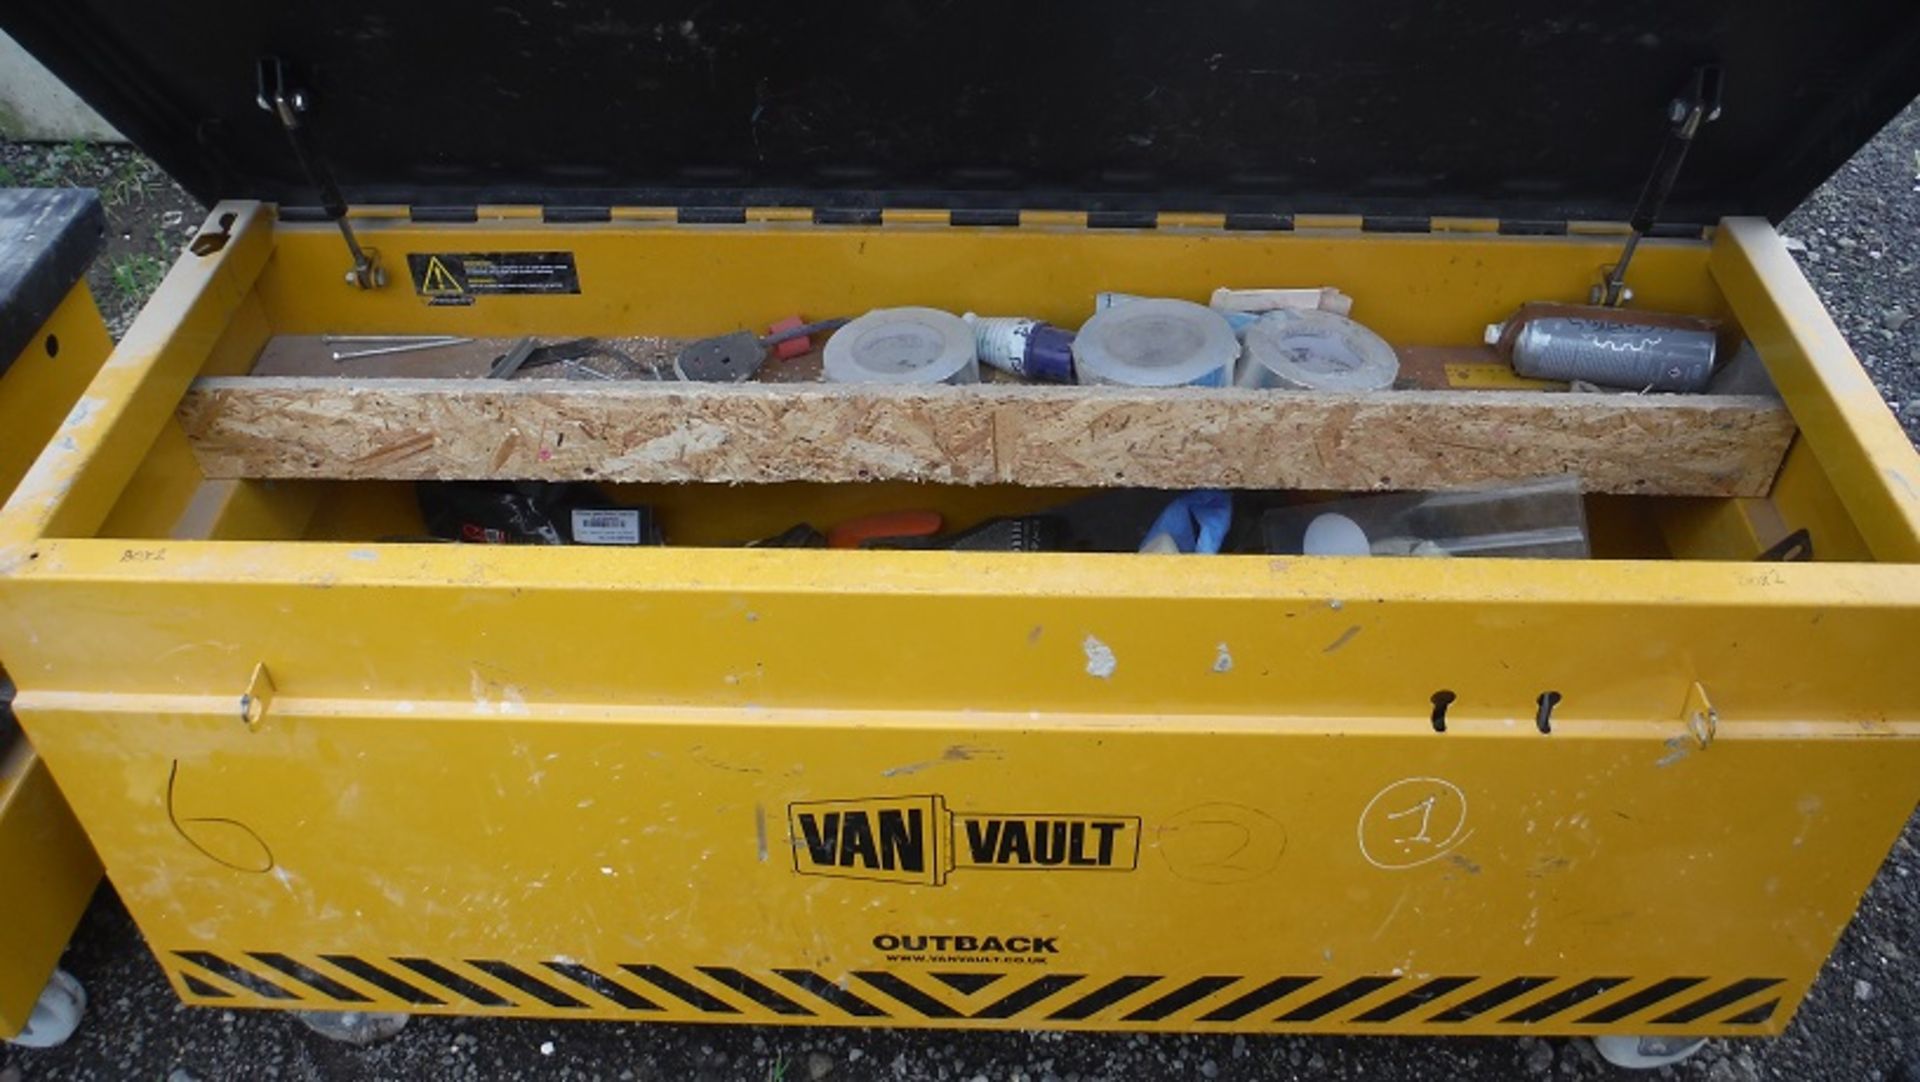 Outback Vault secure van store - Image 3 of 3